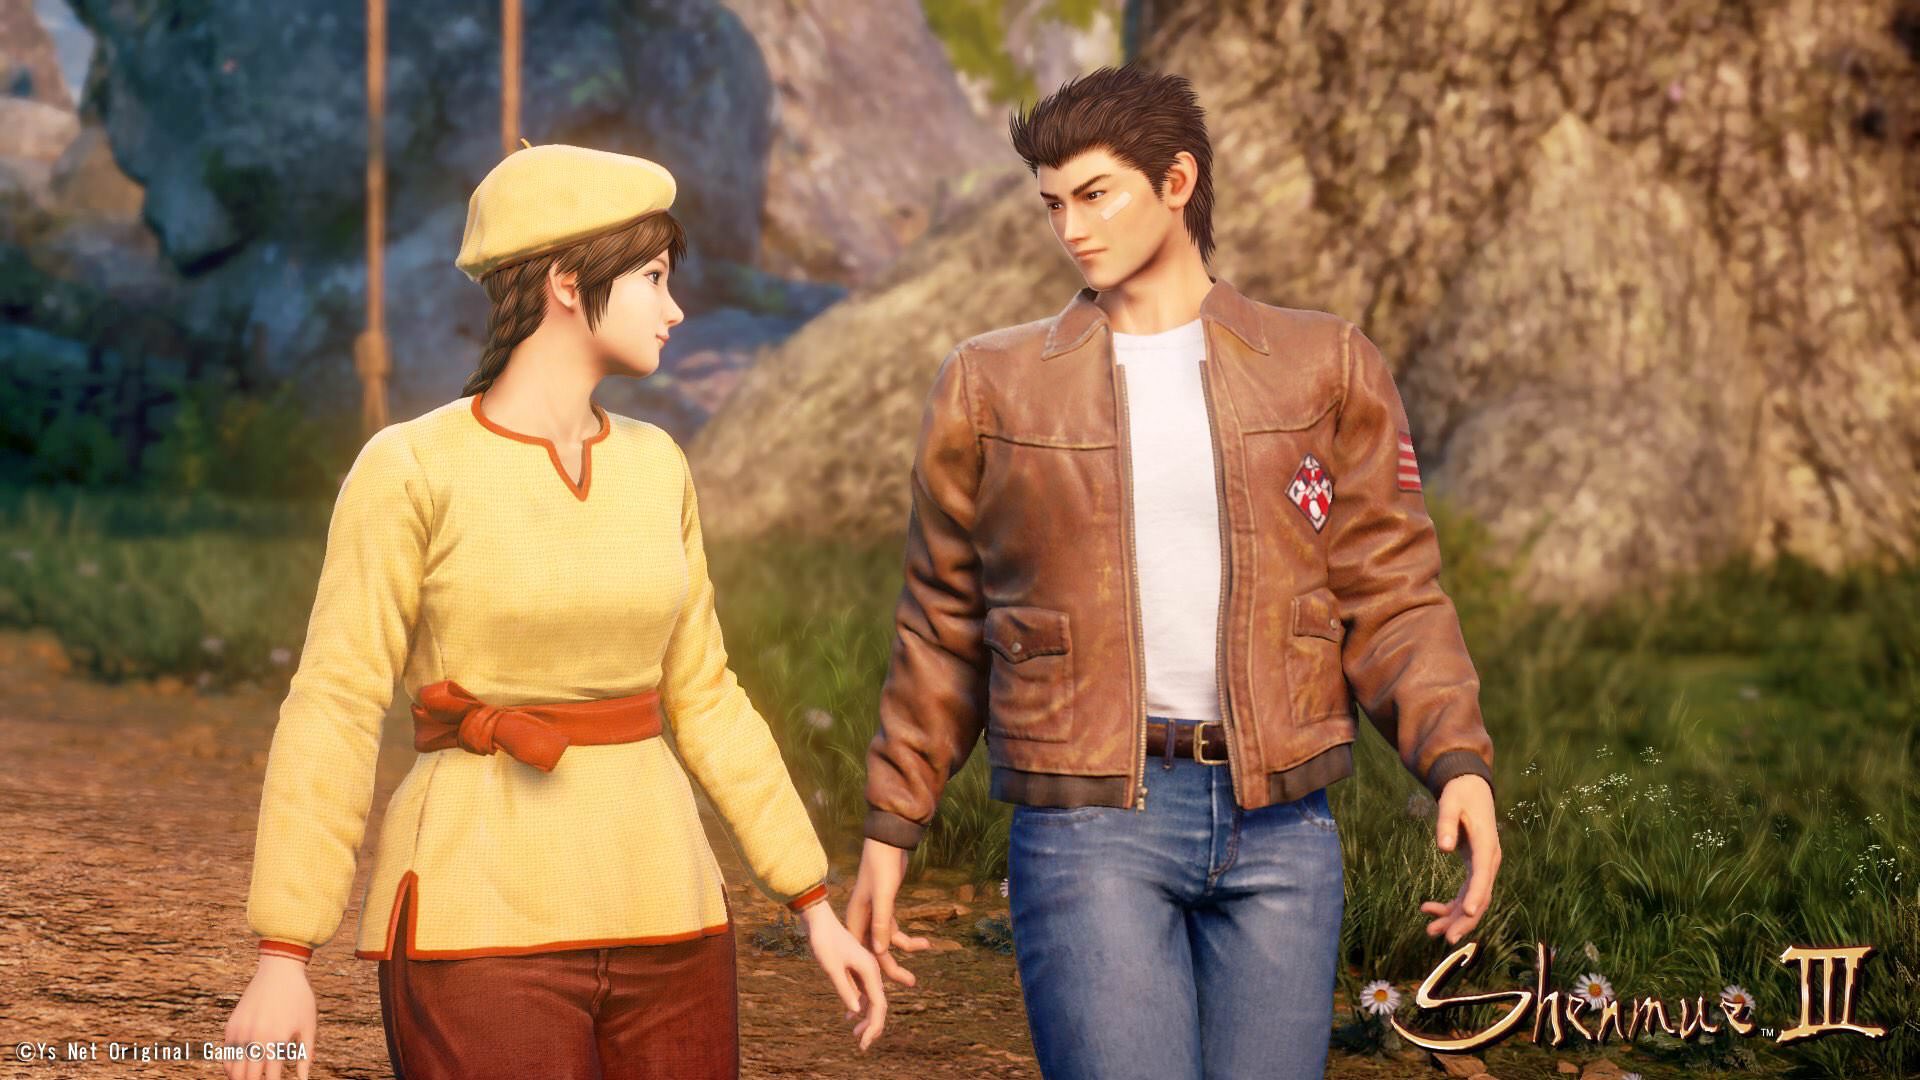 Shenmue Iii Concludes Its Crowdfunding Campaign At Usd